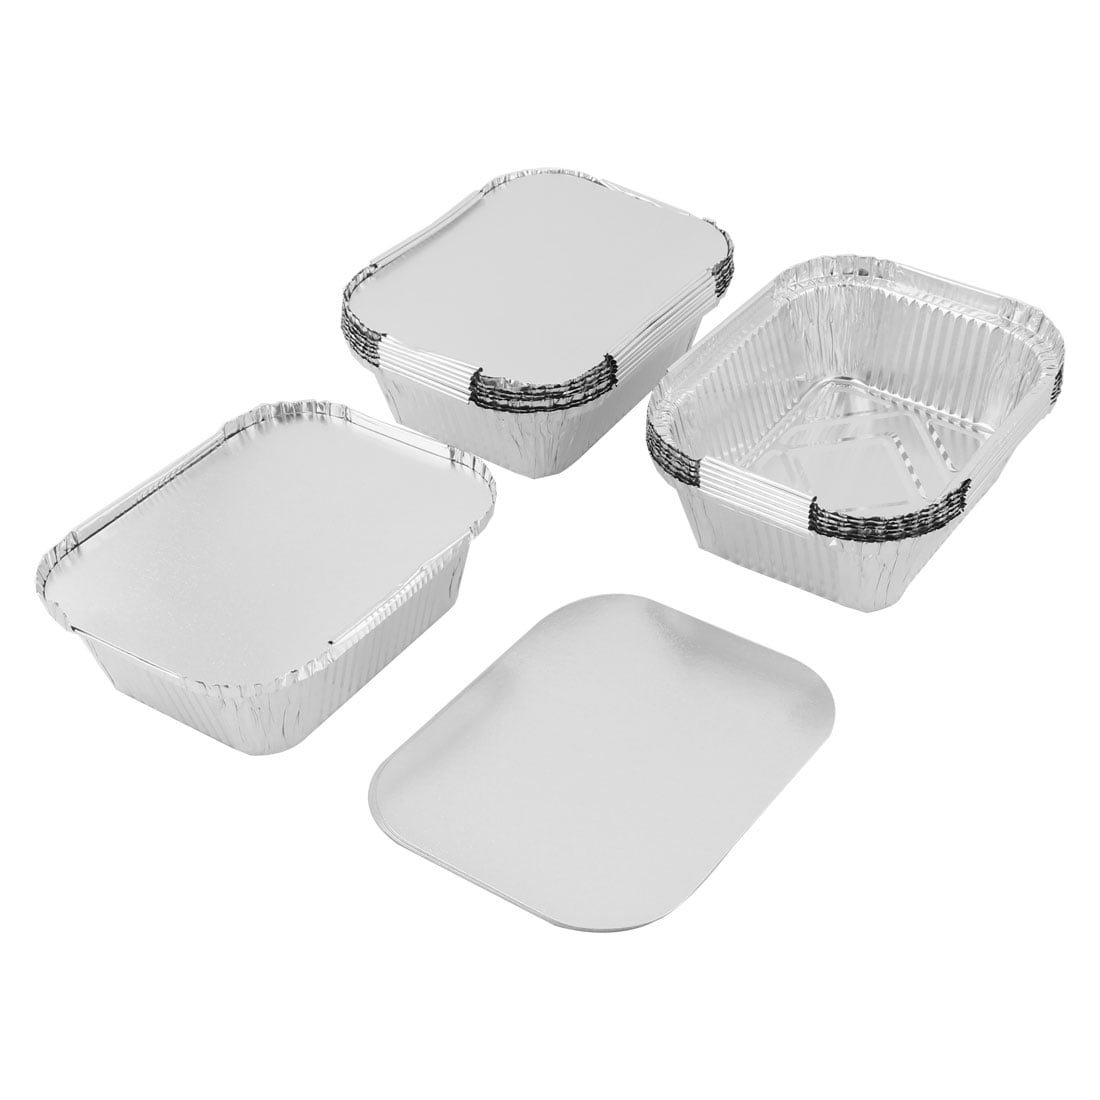 Smart USA 788 Take Out Baking Disposable Foil Containers with Matching Covers 50 2.25-Lbs Oblong Aluminum Foil Pans with Clear Plastic Dome